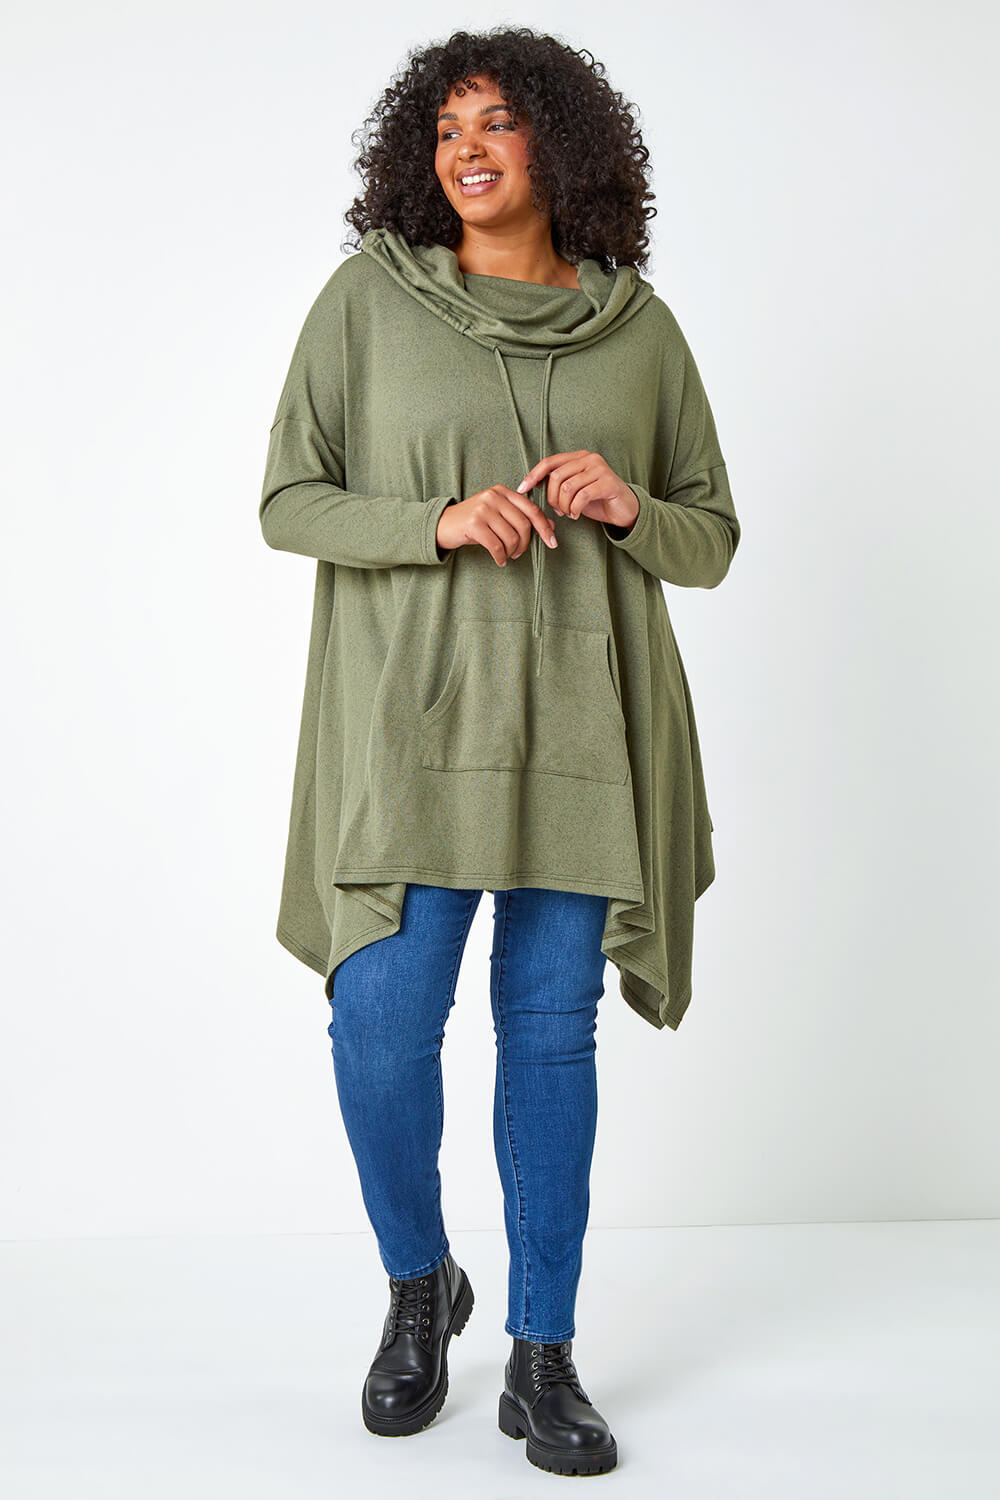 KHAKI Curve Cowl Neck Relaxed Stretch Top, Image 2 of 5